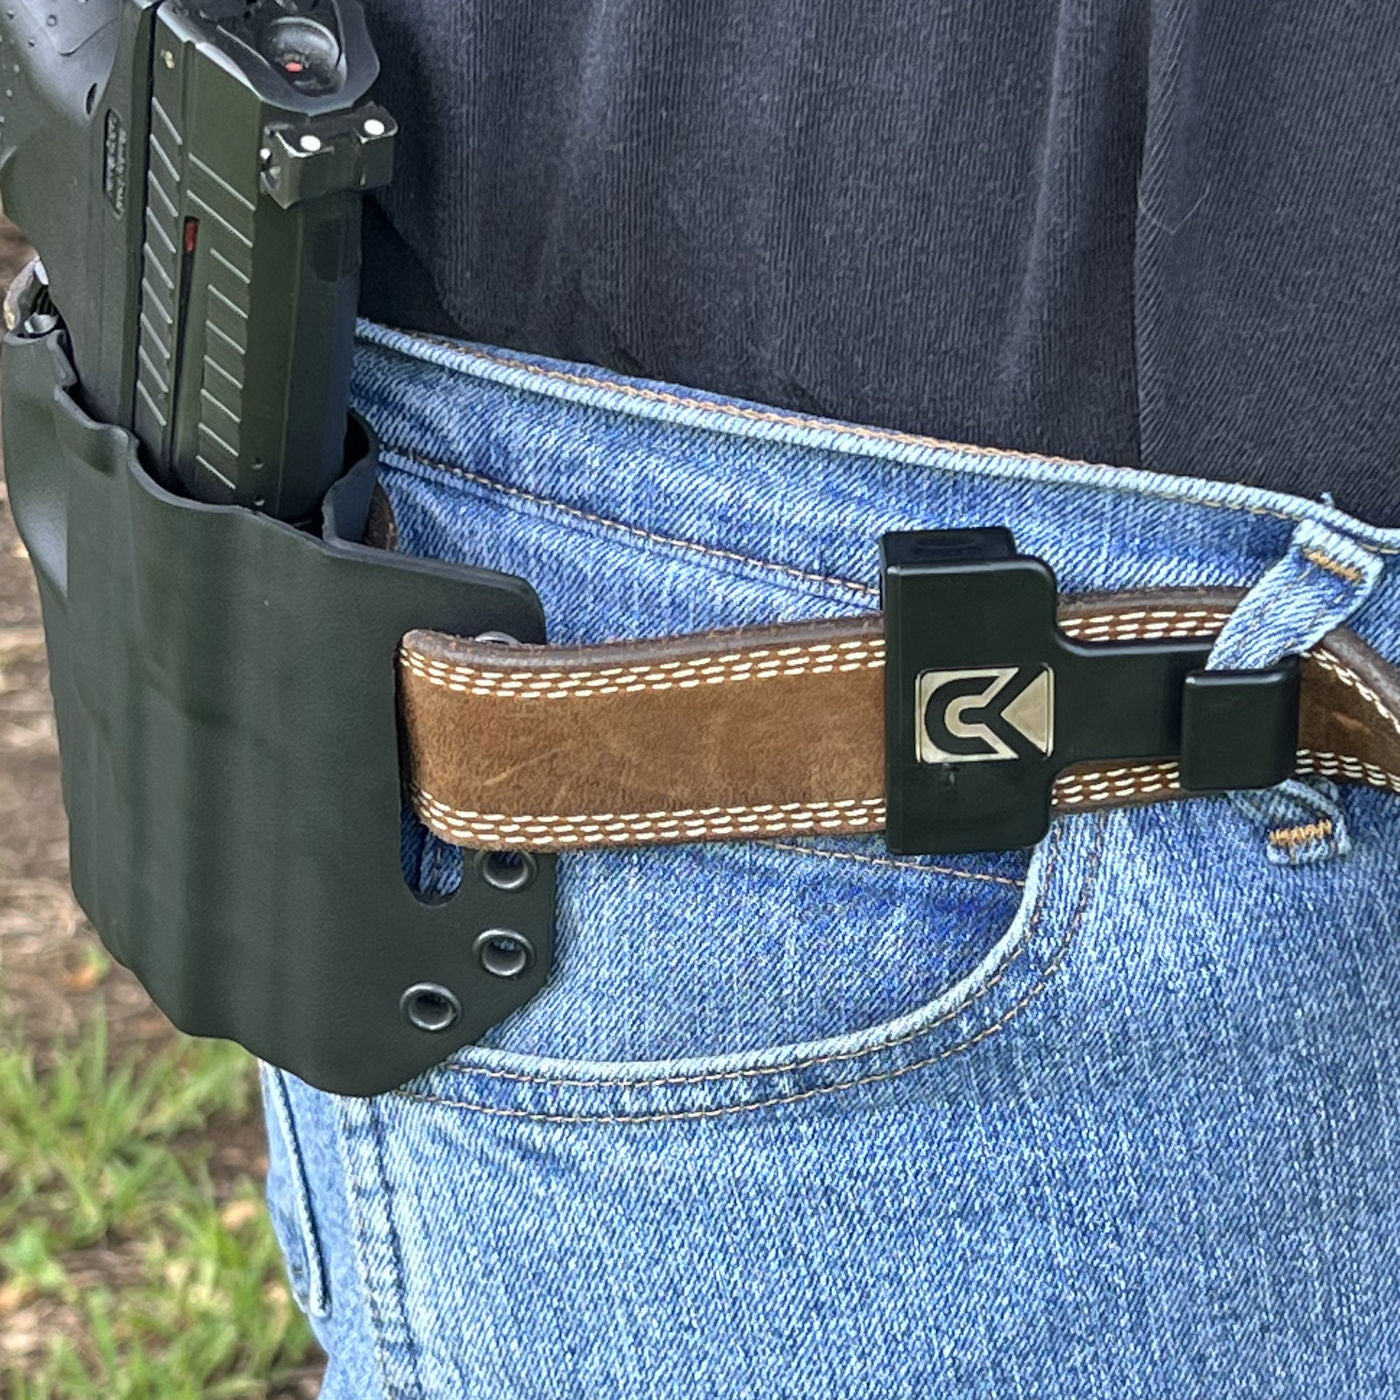 CarryKeeper BEST EDC OWB TOOL for Concealed Carry